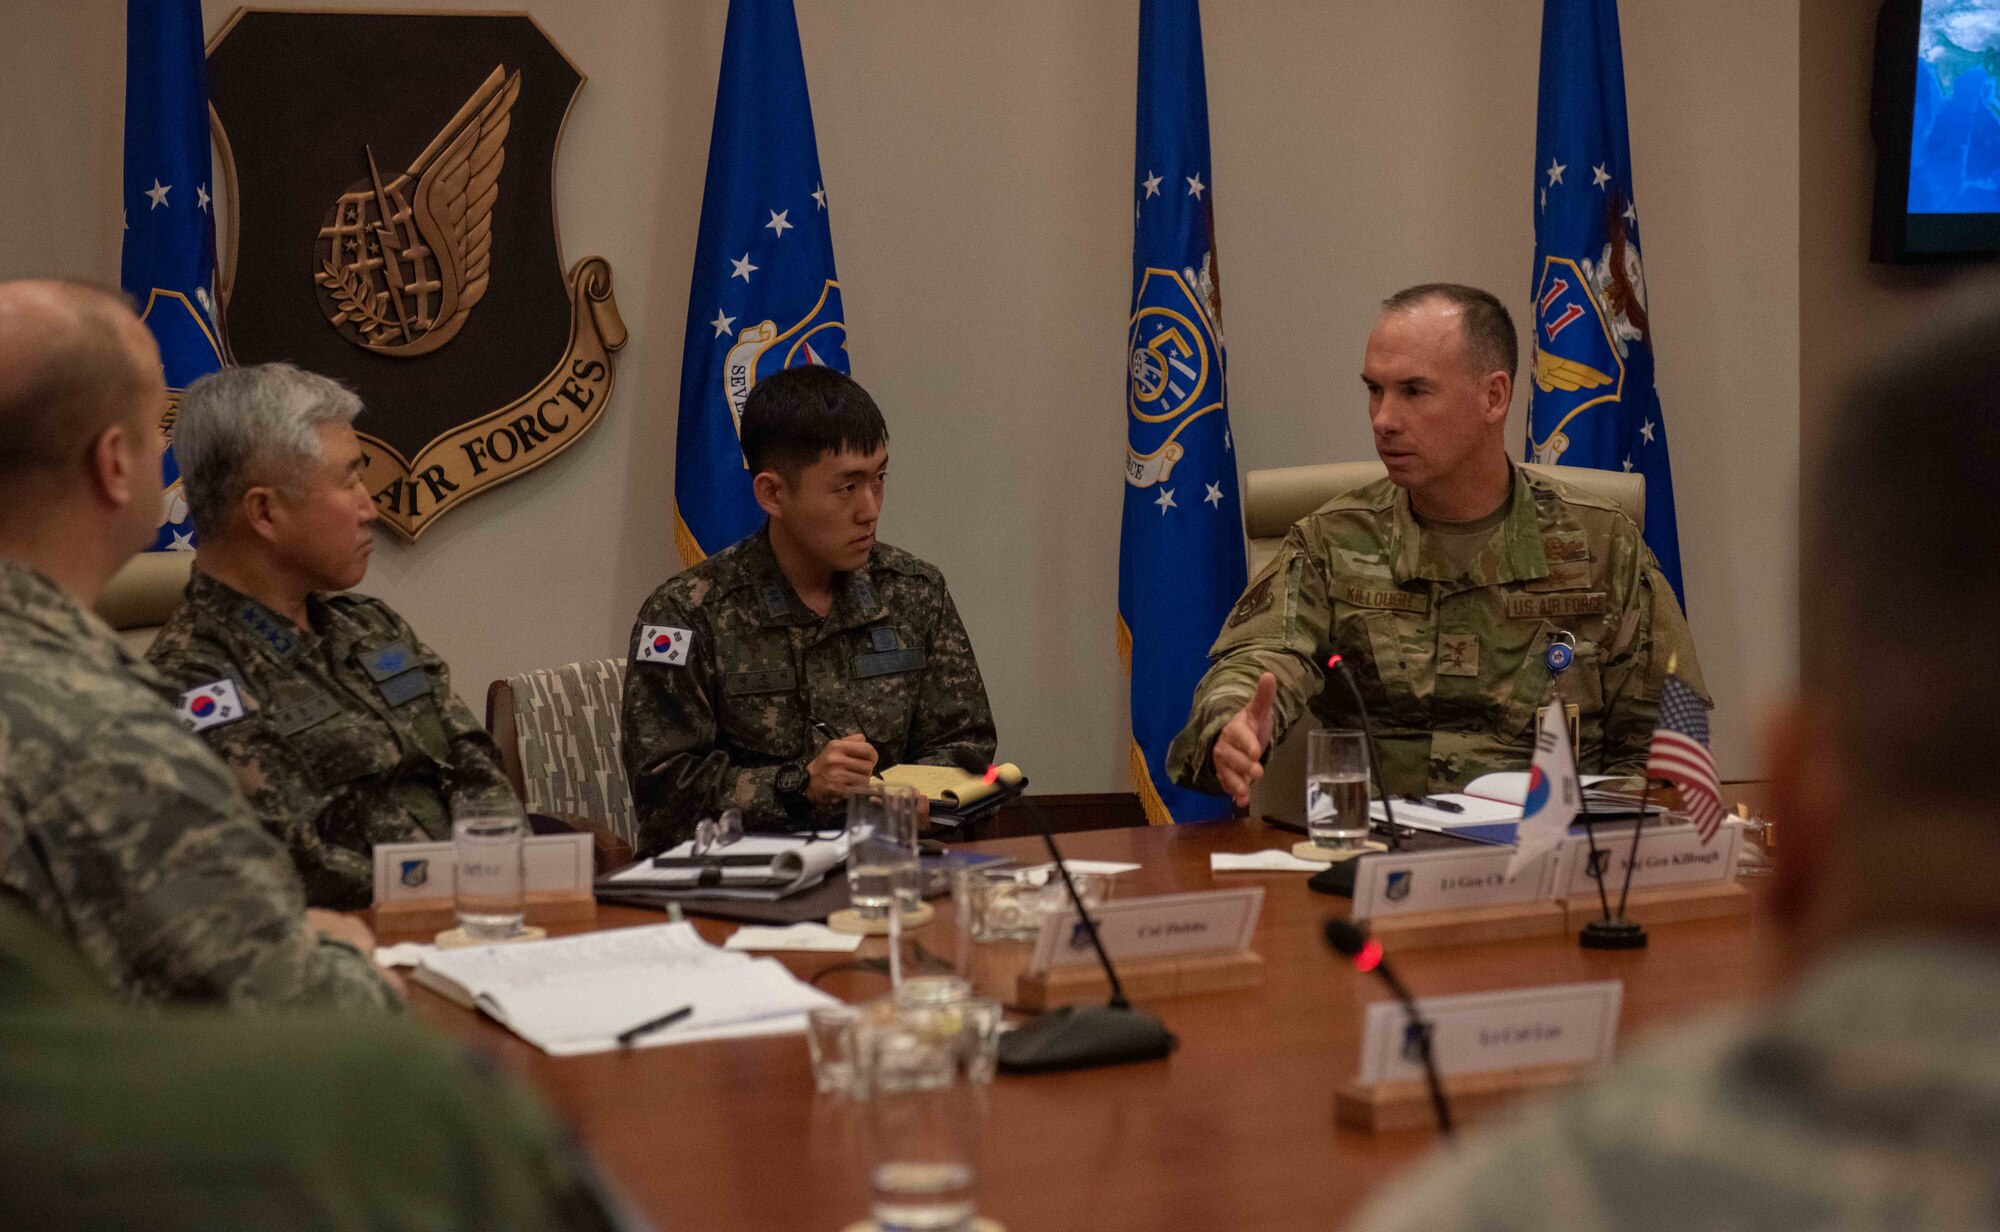 U.S. Air Force Maj. Gen. Brian M. Killough, Pacific Air Forces chief of staff, (far right)  Republic of Korea Air Force Lt Gen. Hyun Koog Choi, ROKAF Academy superintendent, (far left) participate in a roundtable discussion at Headquarters PACAF on Joint Base Pearl Harbor-Hickam, Hawaii, Dec. 11, 2018. Choi, who was recently selected as the new academy superintendent, visited Indo-Pacific Command and PACAF to promote ROK and U.S. cooperation as well as exchange plans and ideas to maintain maximum readiness. The strong friendship and defense relationship between the U.S. and ROK assures stability in the region and solidifies the commitment to a free and open Indo-Pacific region. (U.S. Air Force Photo by Staff Sgt. Daniel Robles)